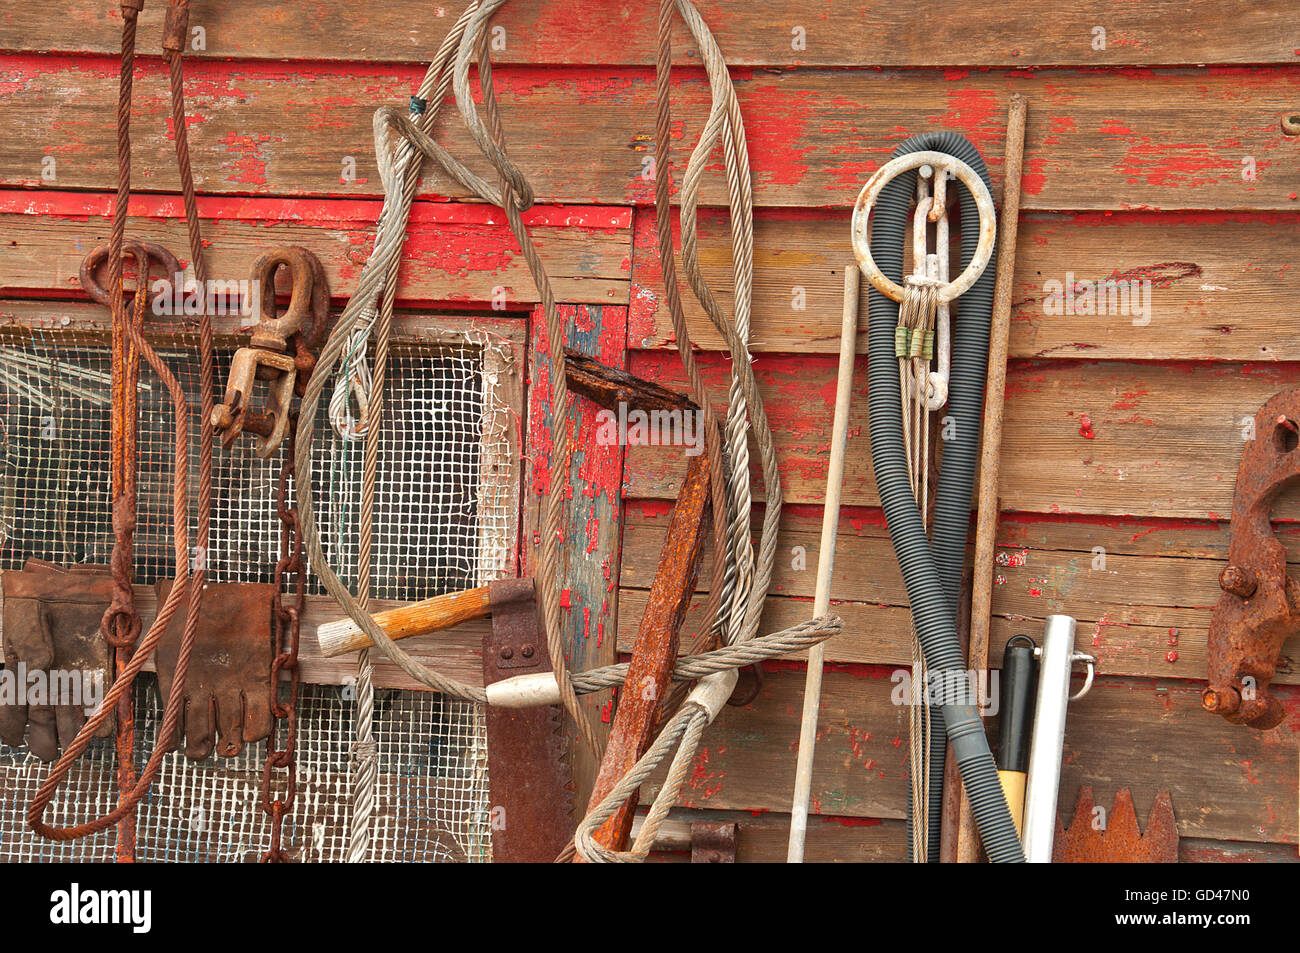 Tool wall on a fishing boat contains great variety of old school